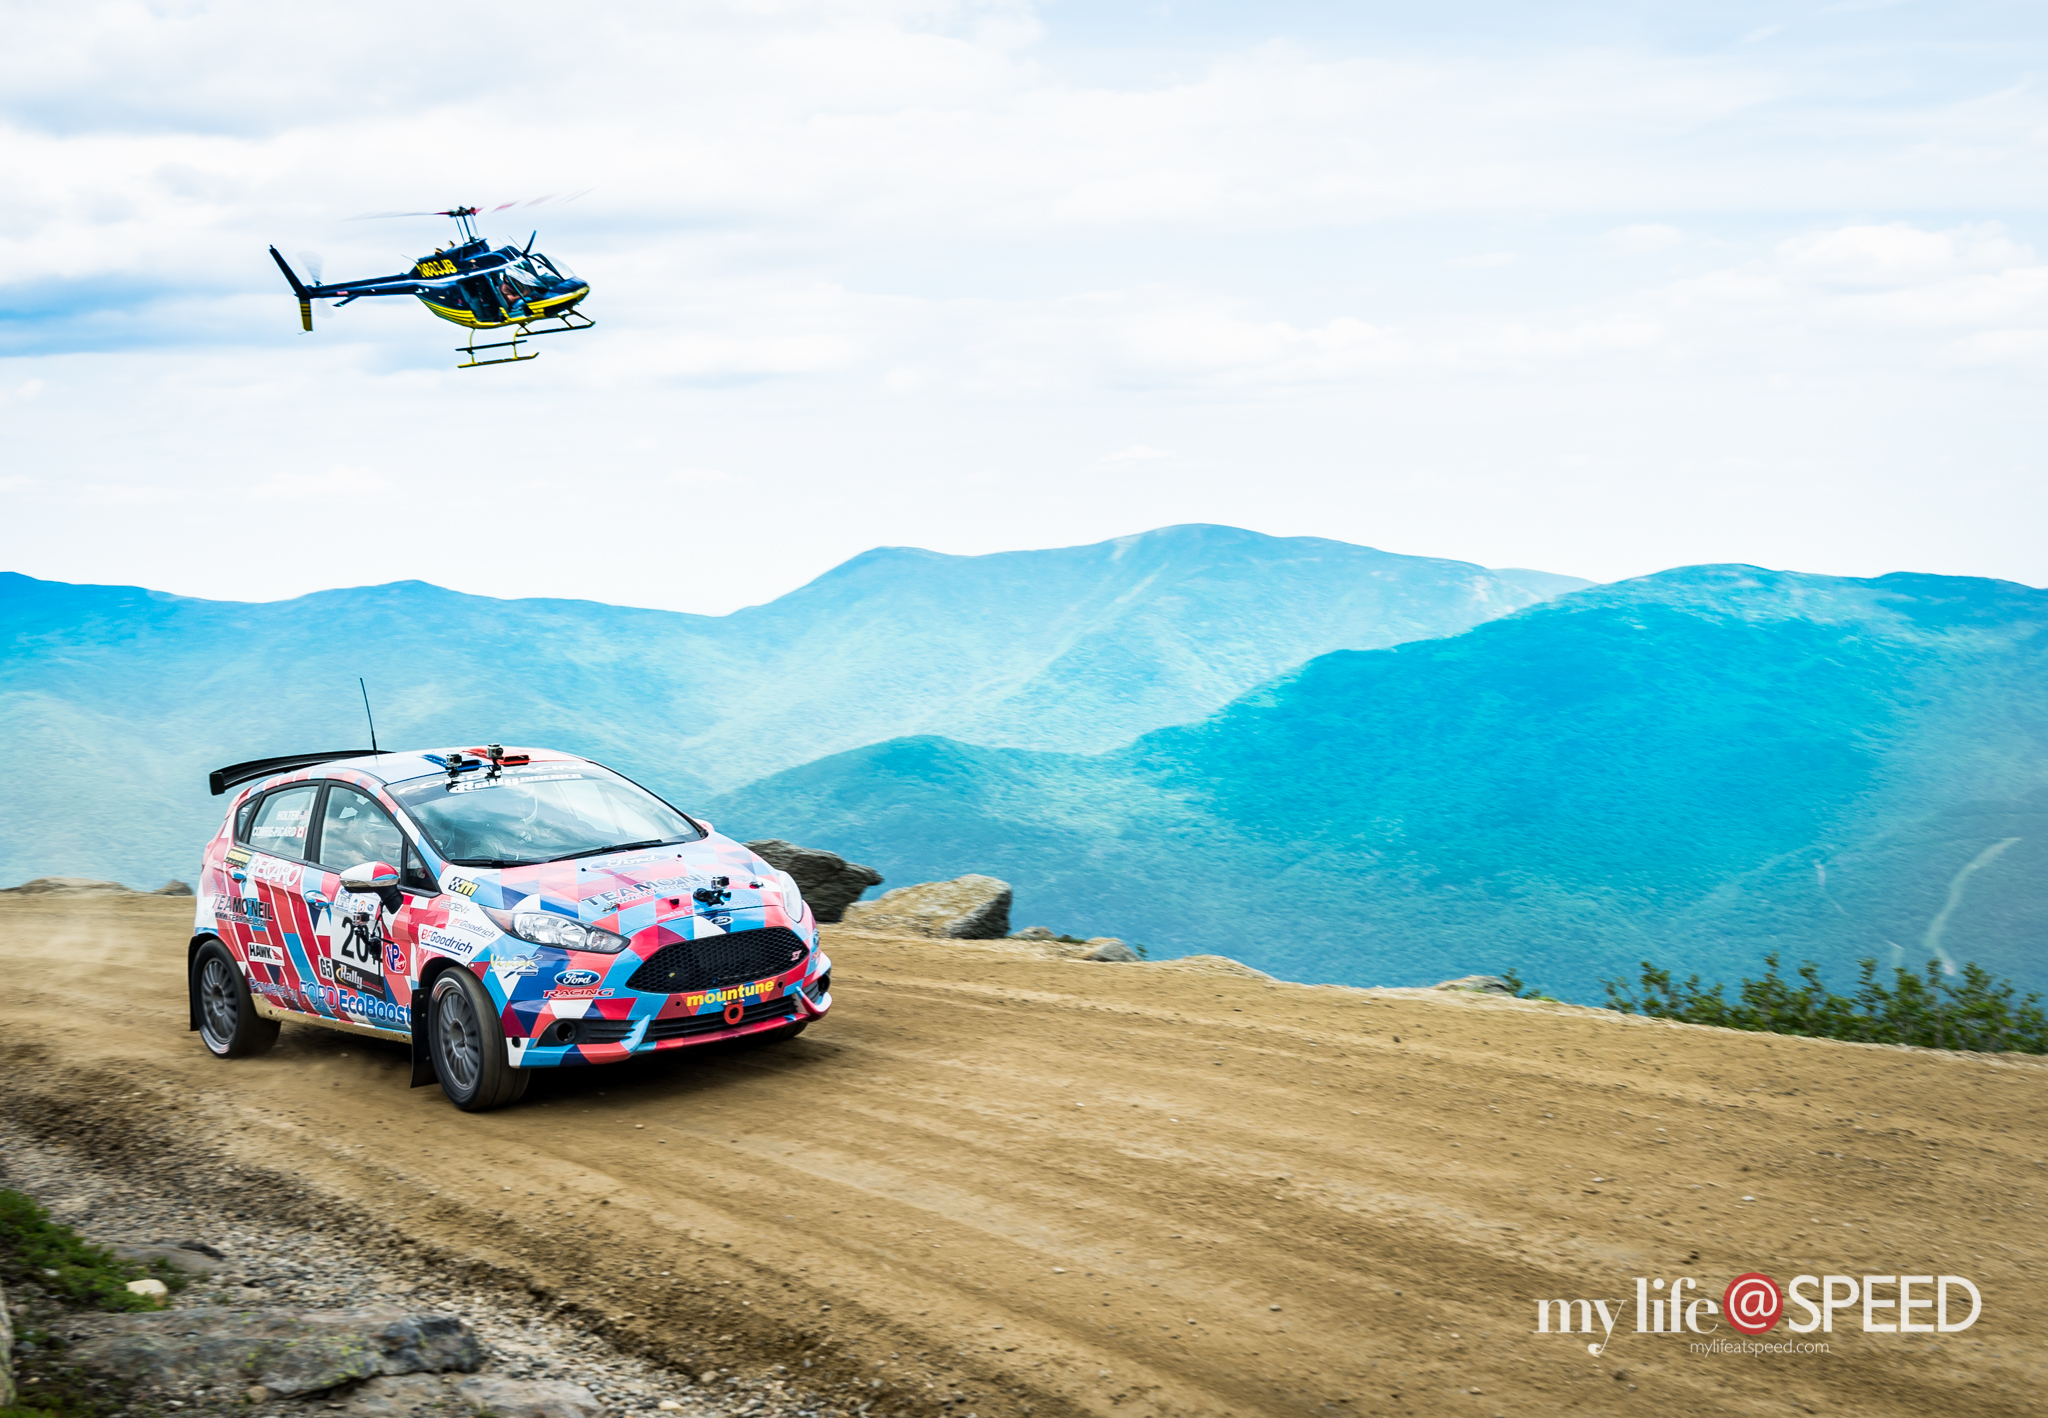 Team Oniel's Andrew Comrie-Picard/Ole Holter 2014 Ford Fiesta shadowed by the Helicopter